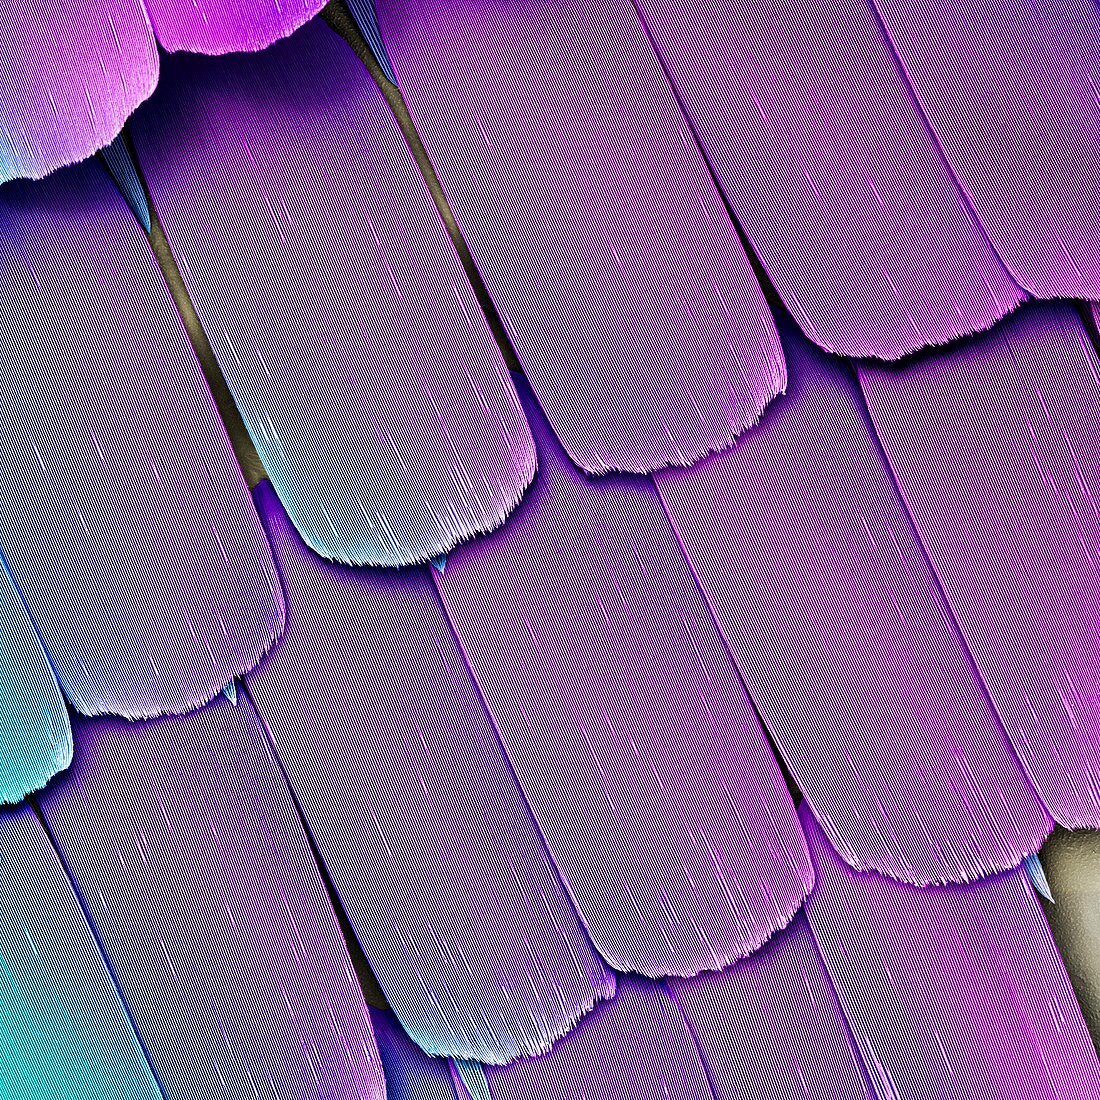 Butterfly wing scales